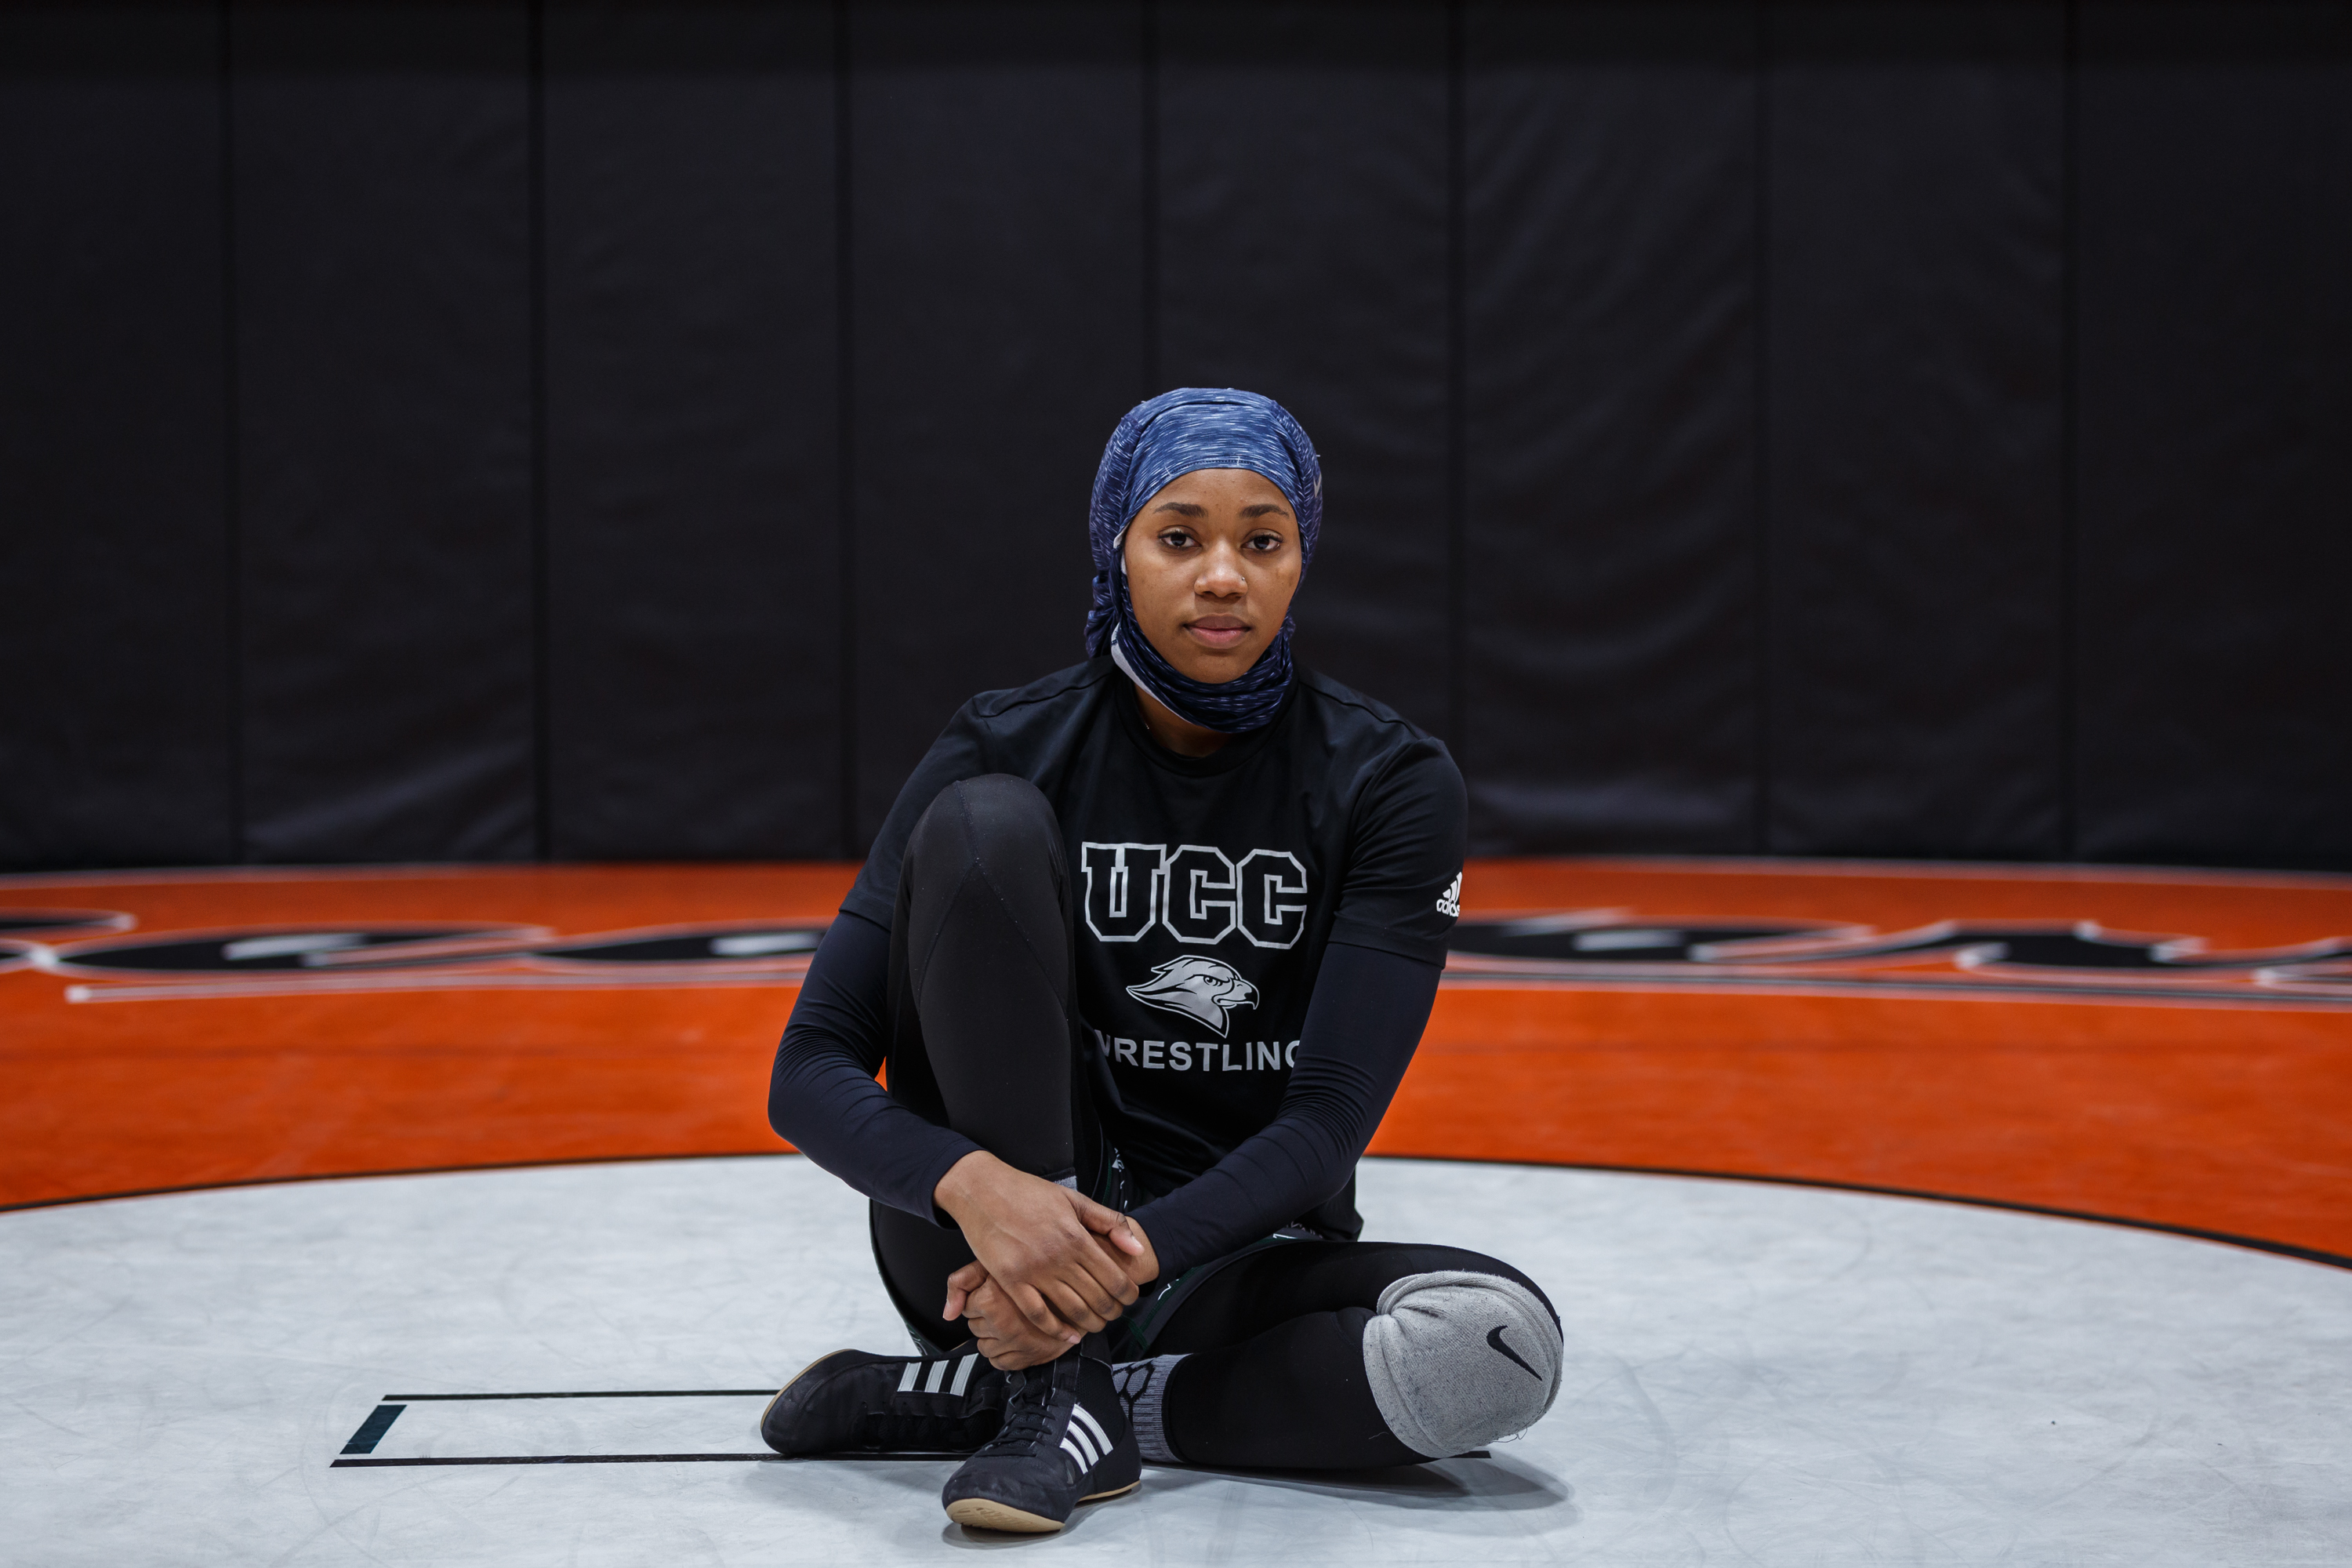 Muslim Women Wrestlers Say They Face Discrimination HuffPost Women